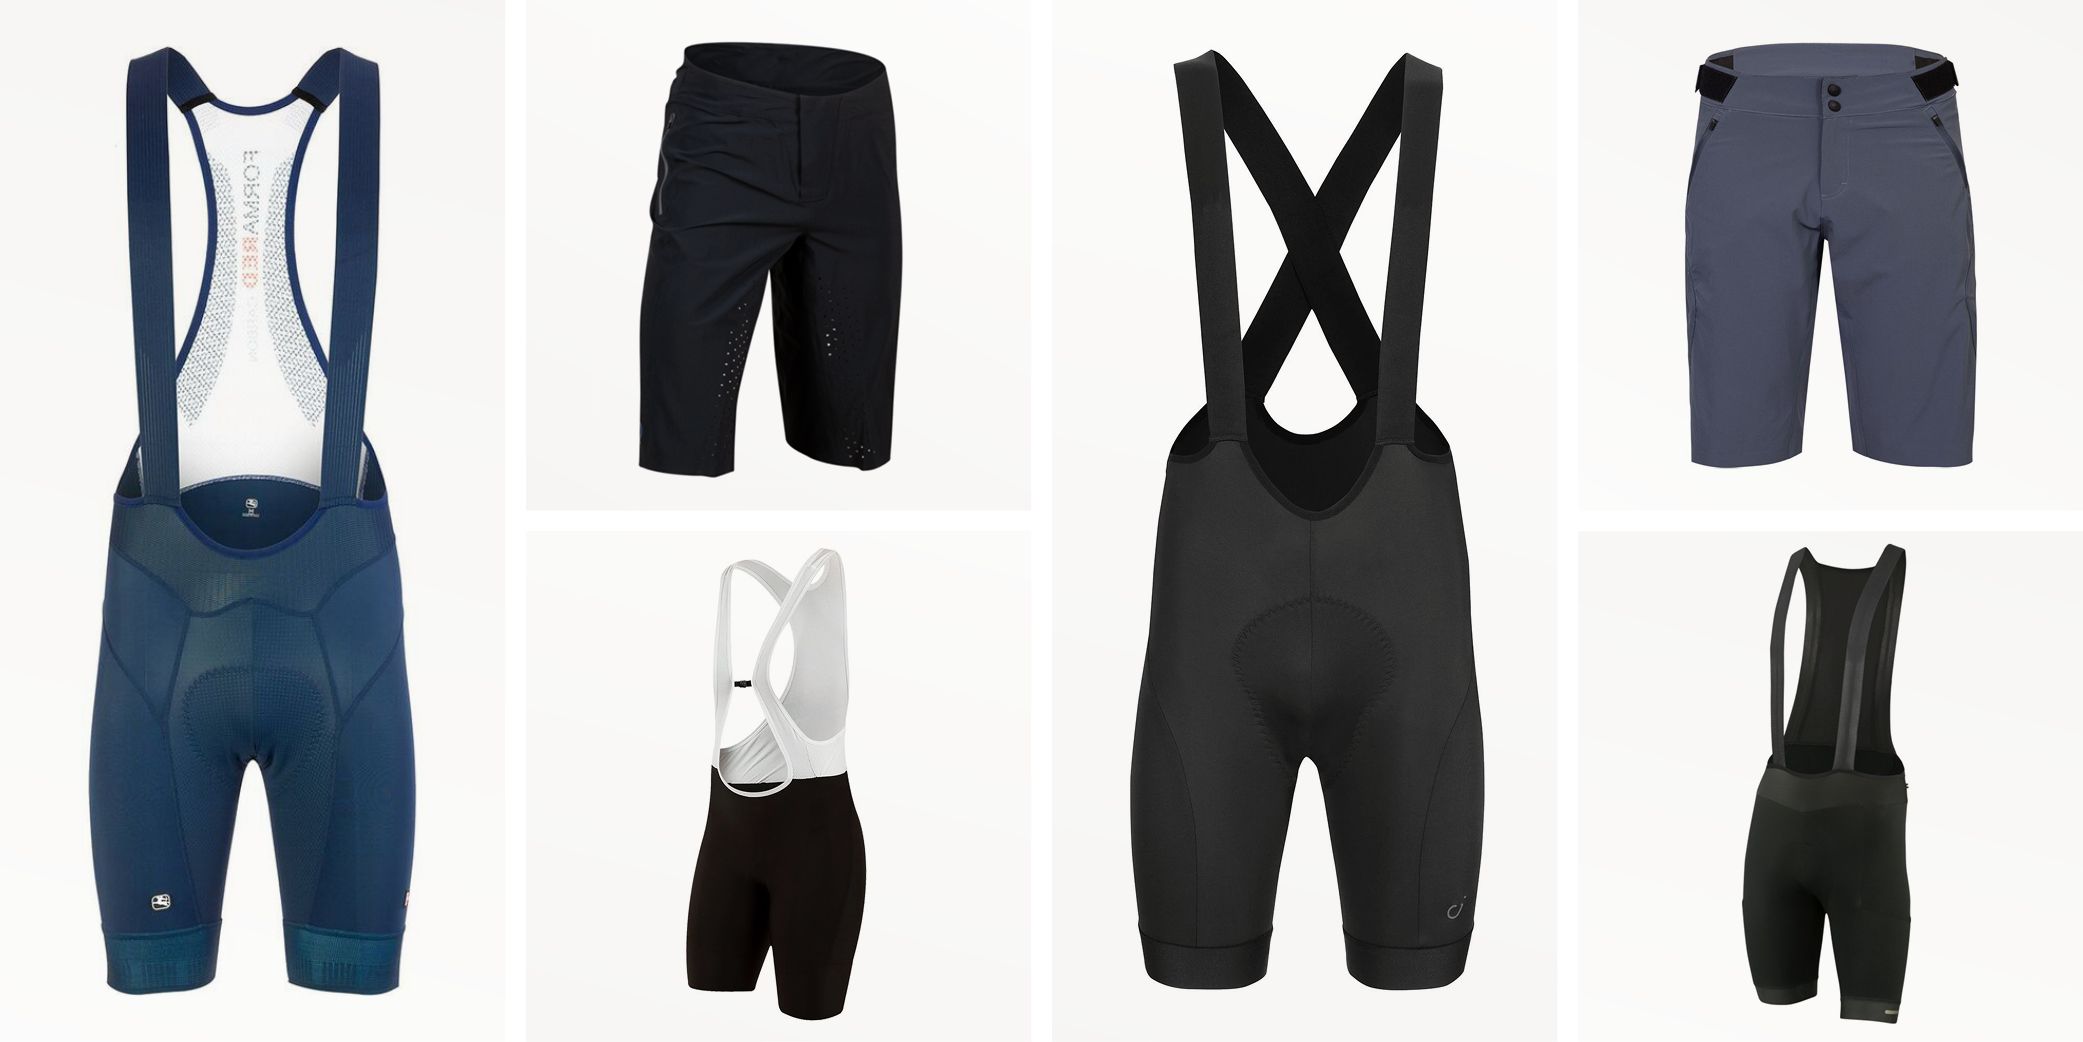 EVADE Touring Cycling Bib Short with 3D Gel Pad